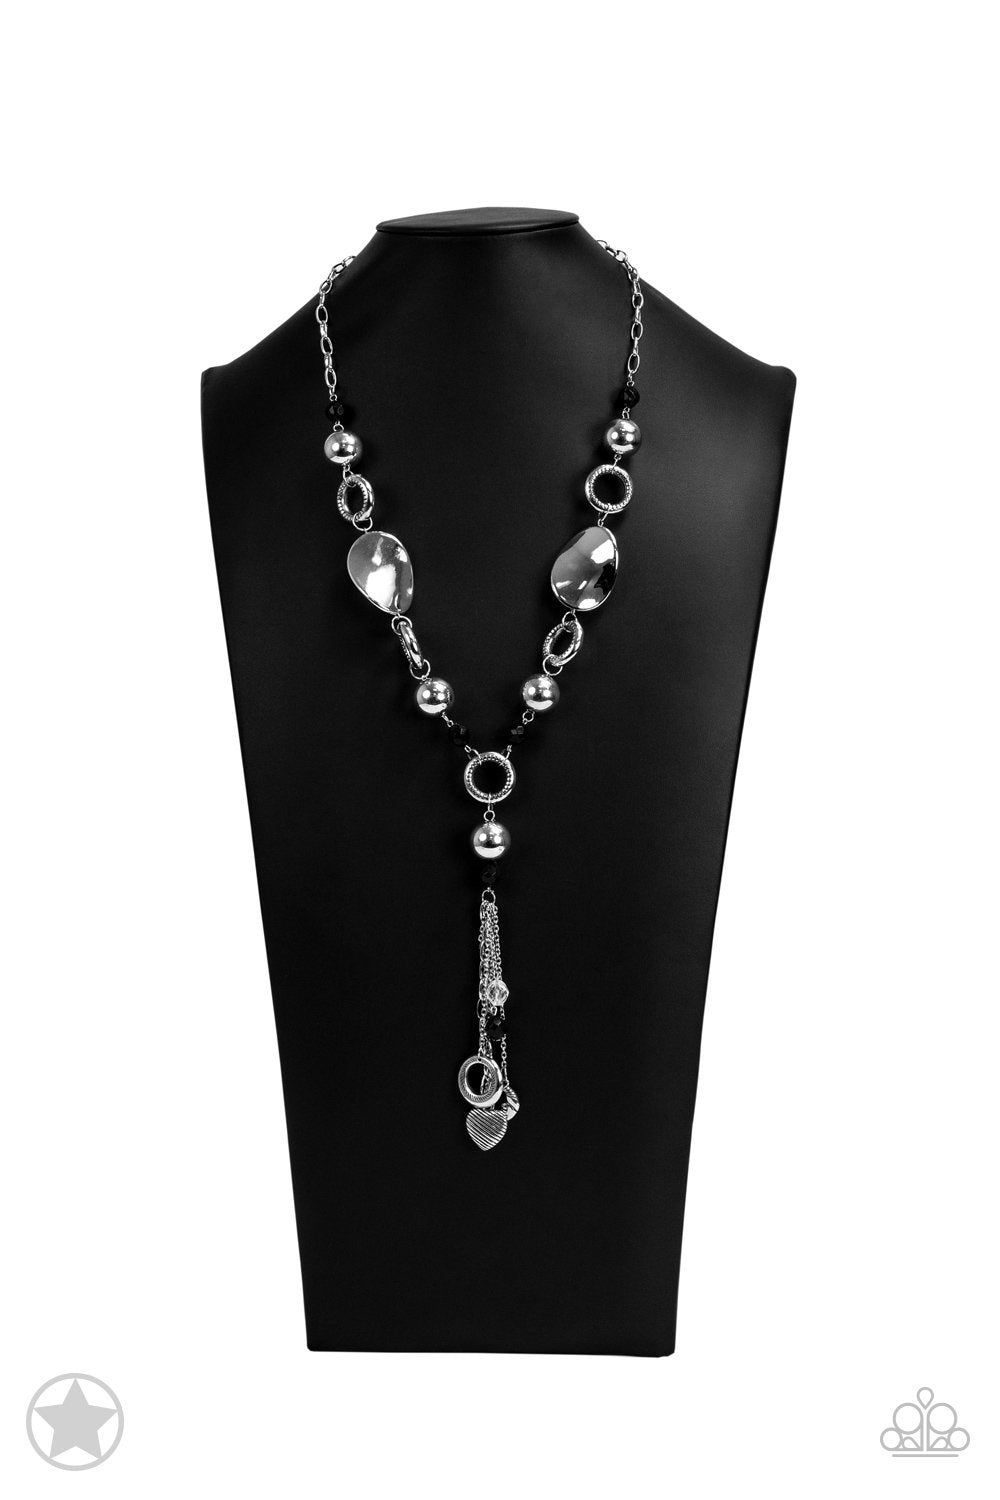 Total Eclipse of the Heart Long Silver Tassel Necklace and matching Earrings - Paparazzi Accessories- on bust -CarasShop.com - $5 Jewelry by Cara Jewels